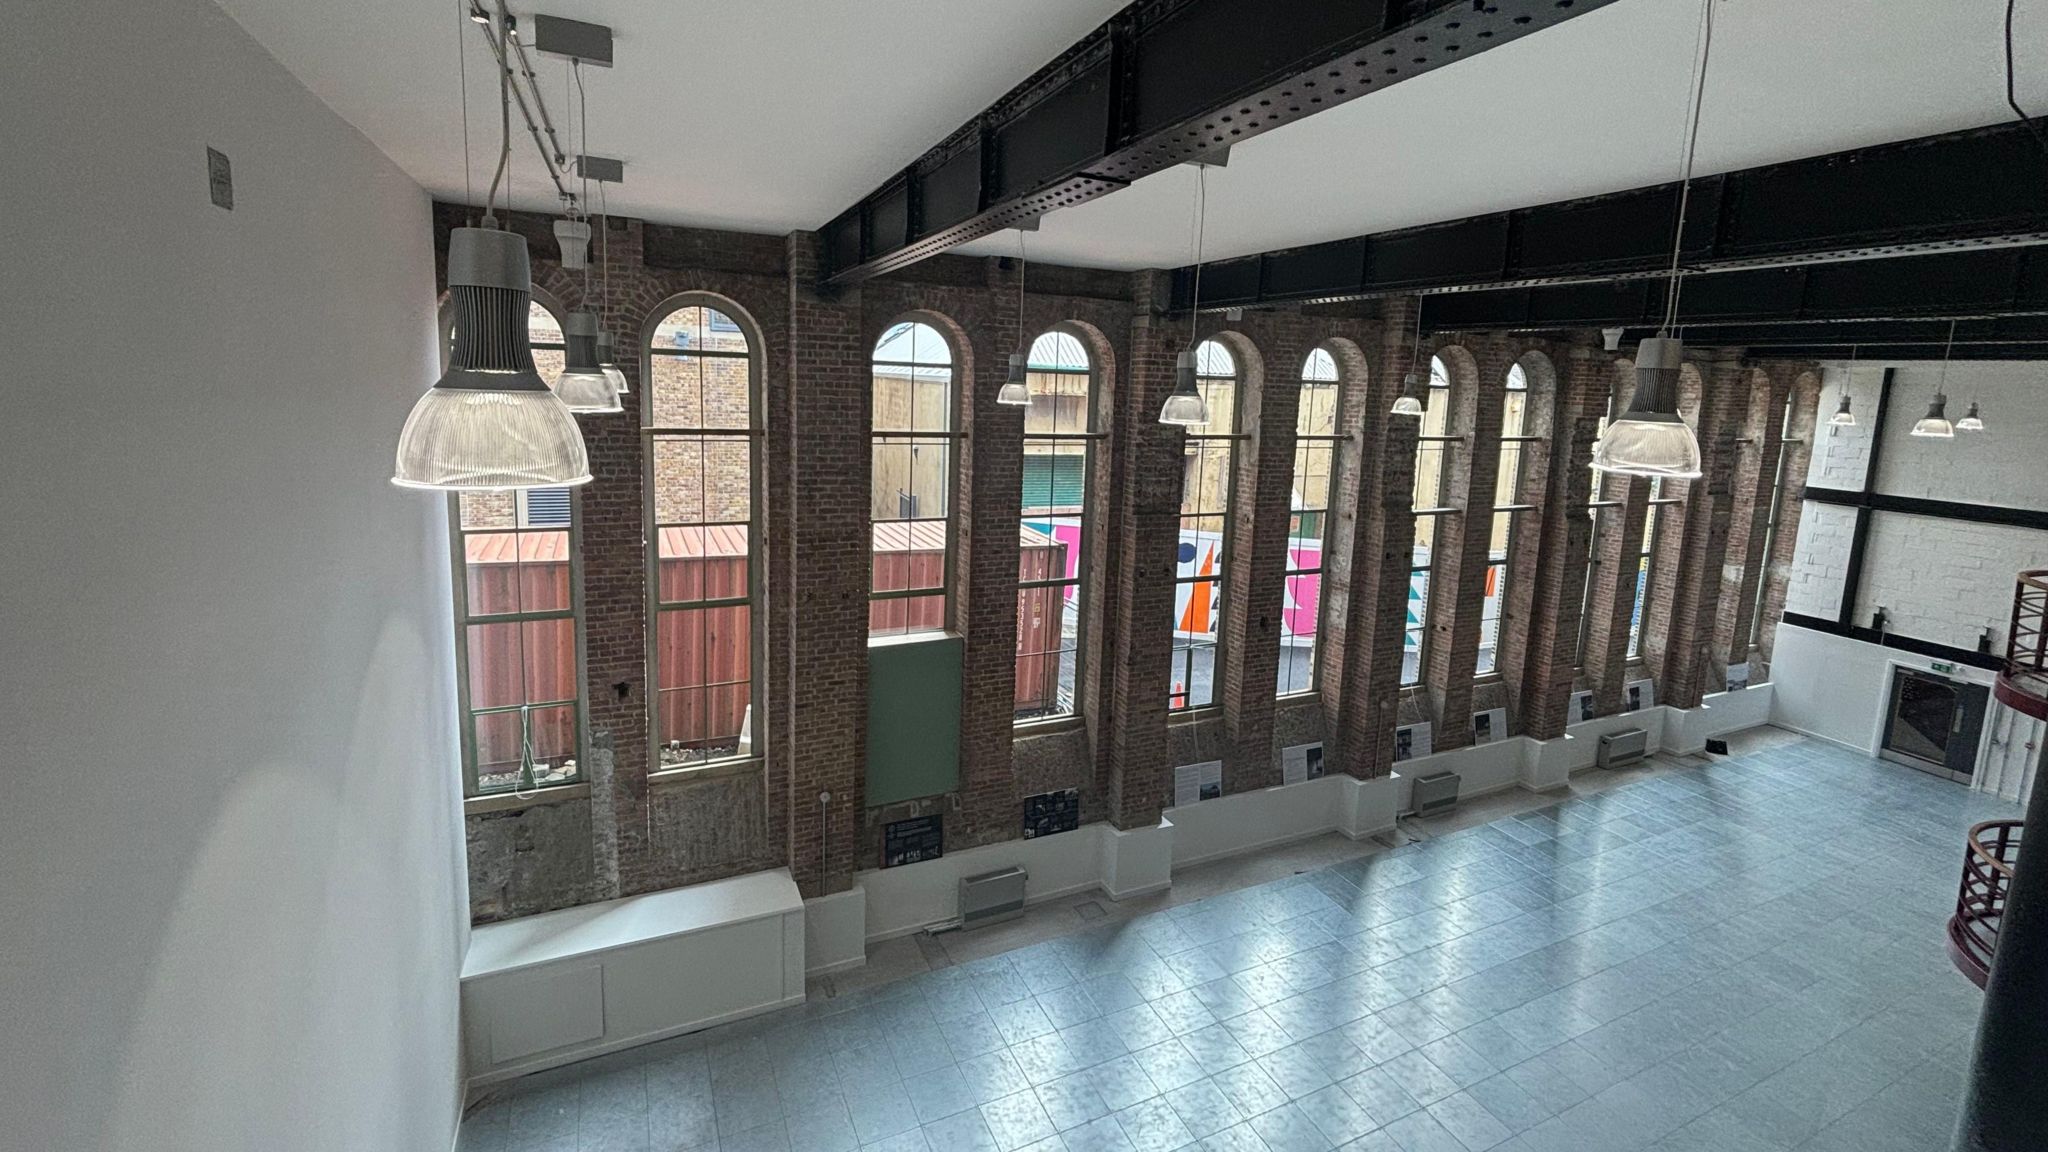 Large arch windows in The Pattern Shop